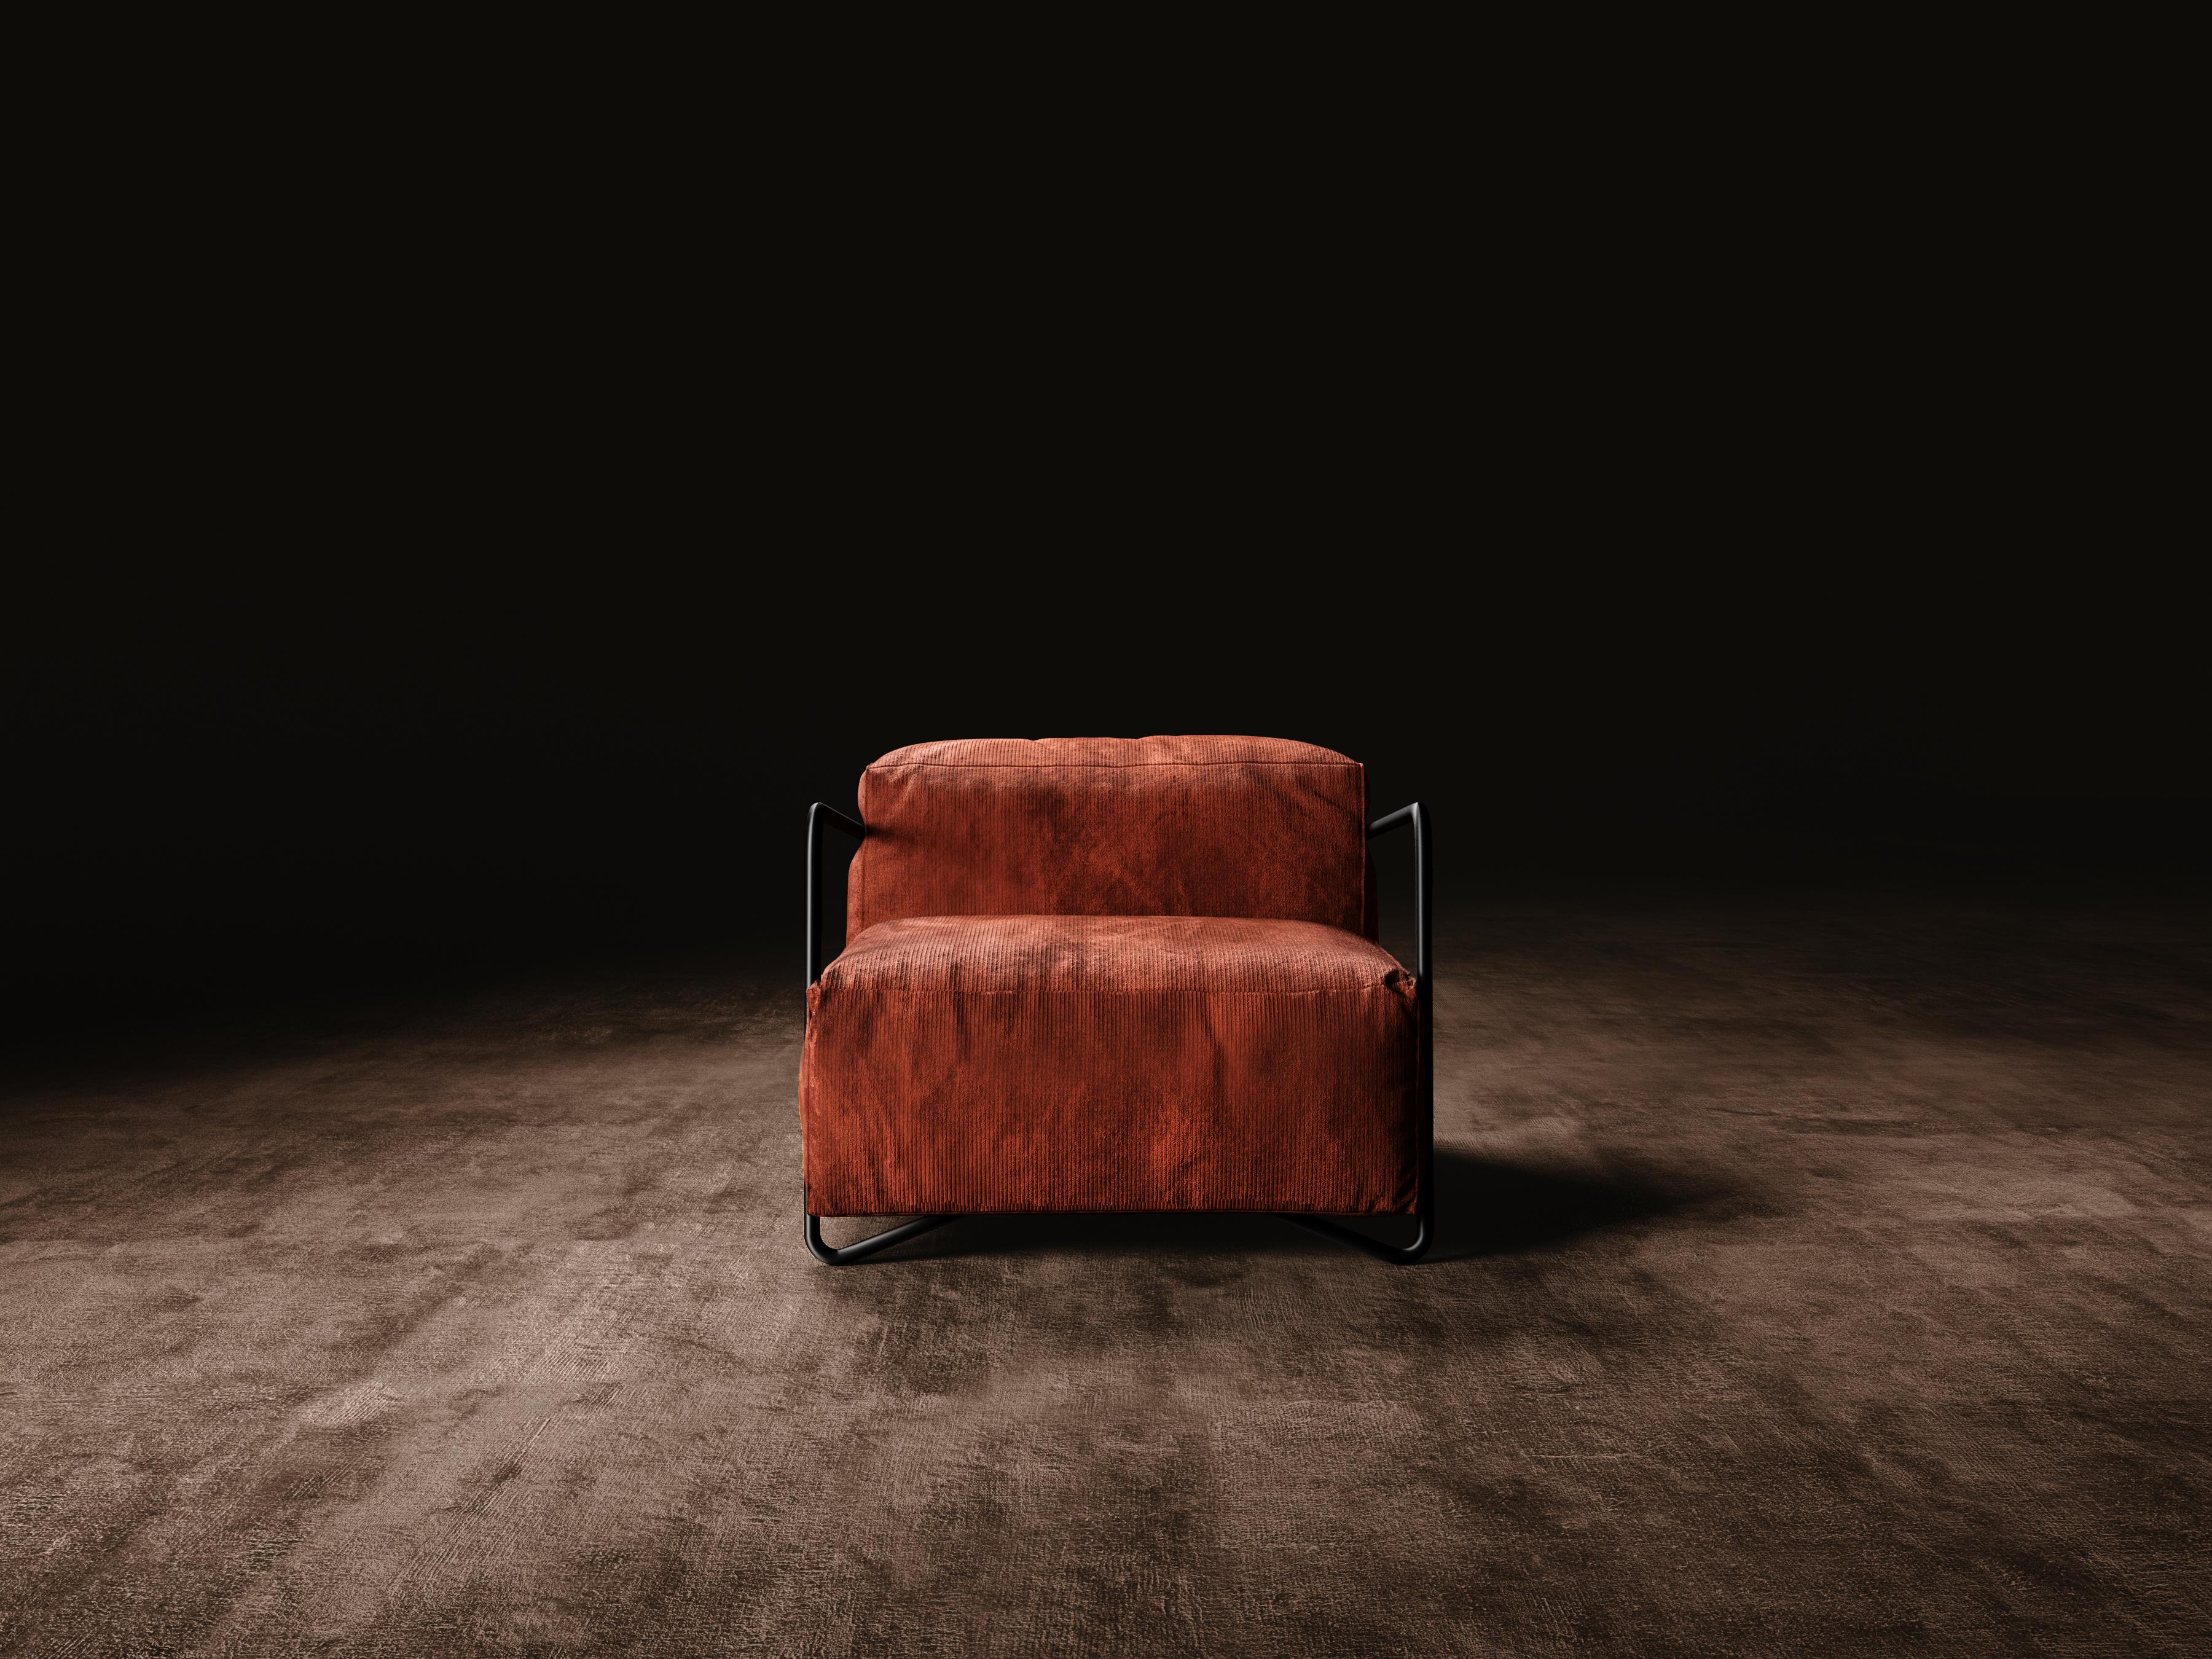 JE T'Attends armchair is part of the Esprit Noir Capsule Collection.
JE T'Attends armchair is composed of a wooden shell padded with differentiated density polyurethane foam with a top layer mixed with goose feather. The armchair is completely